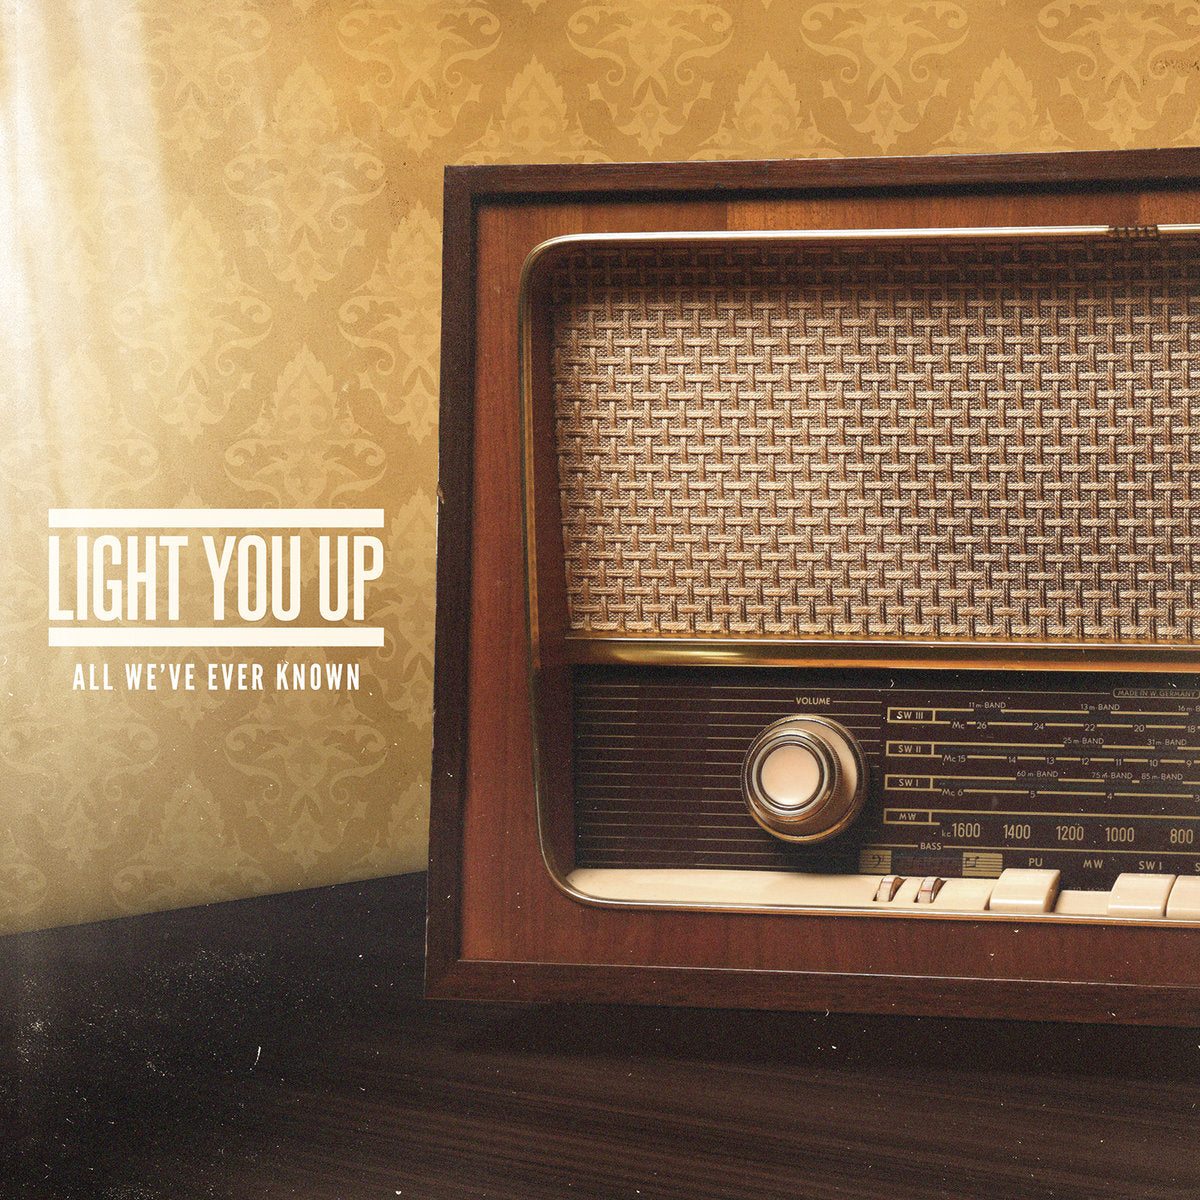 Light You Up "All We've Ever Known" CD